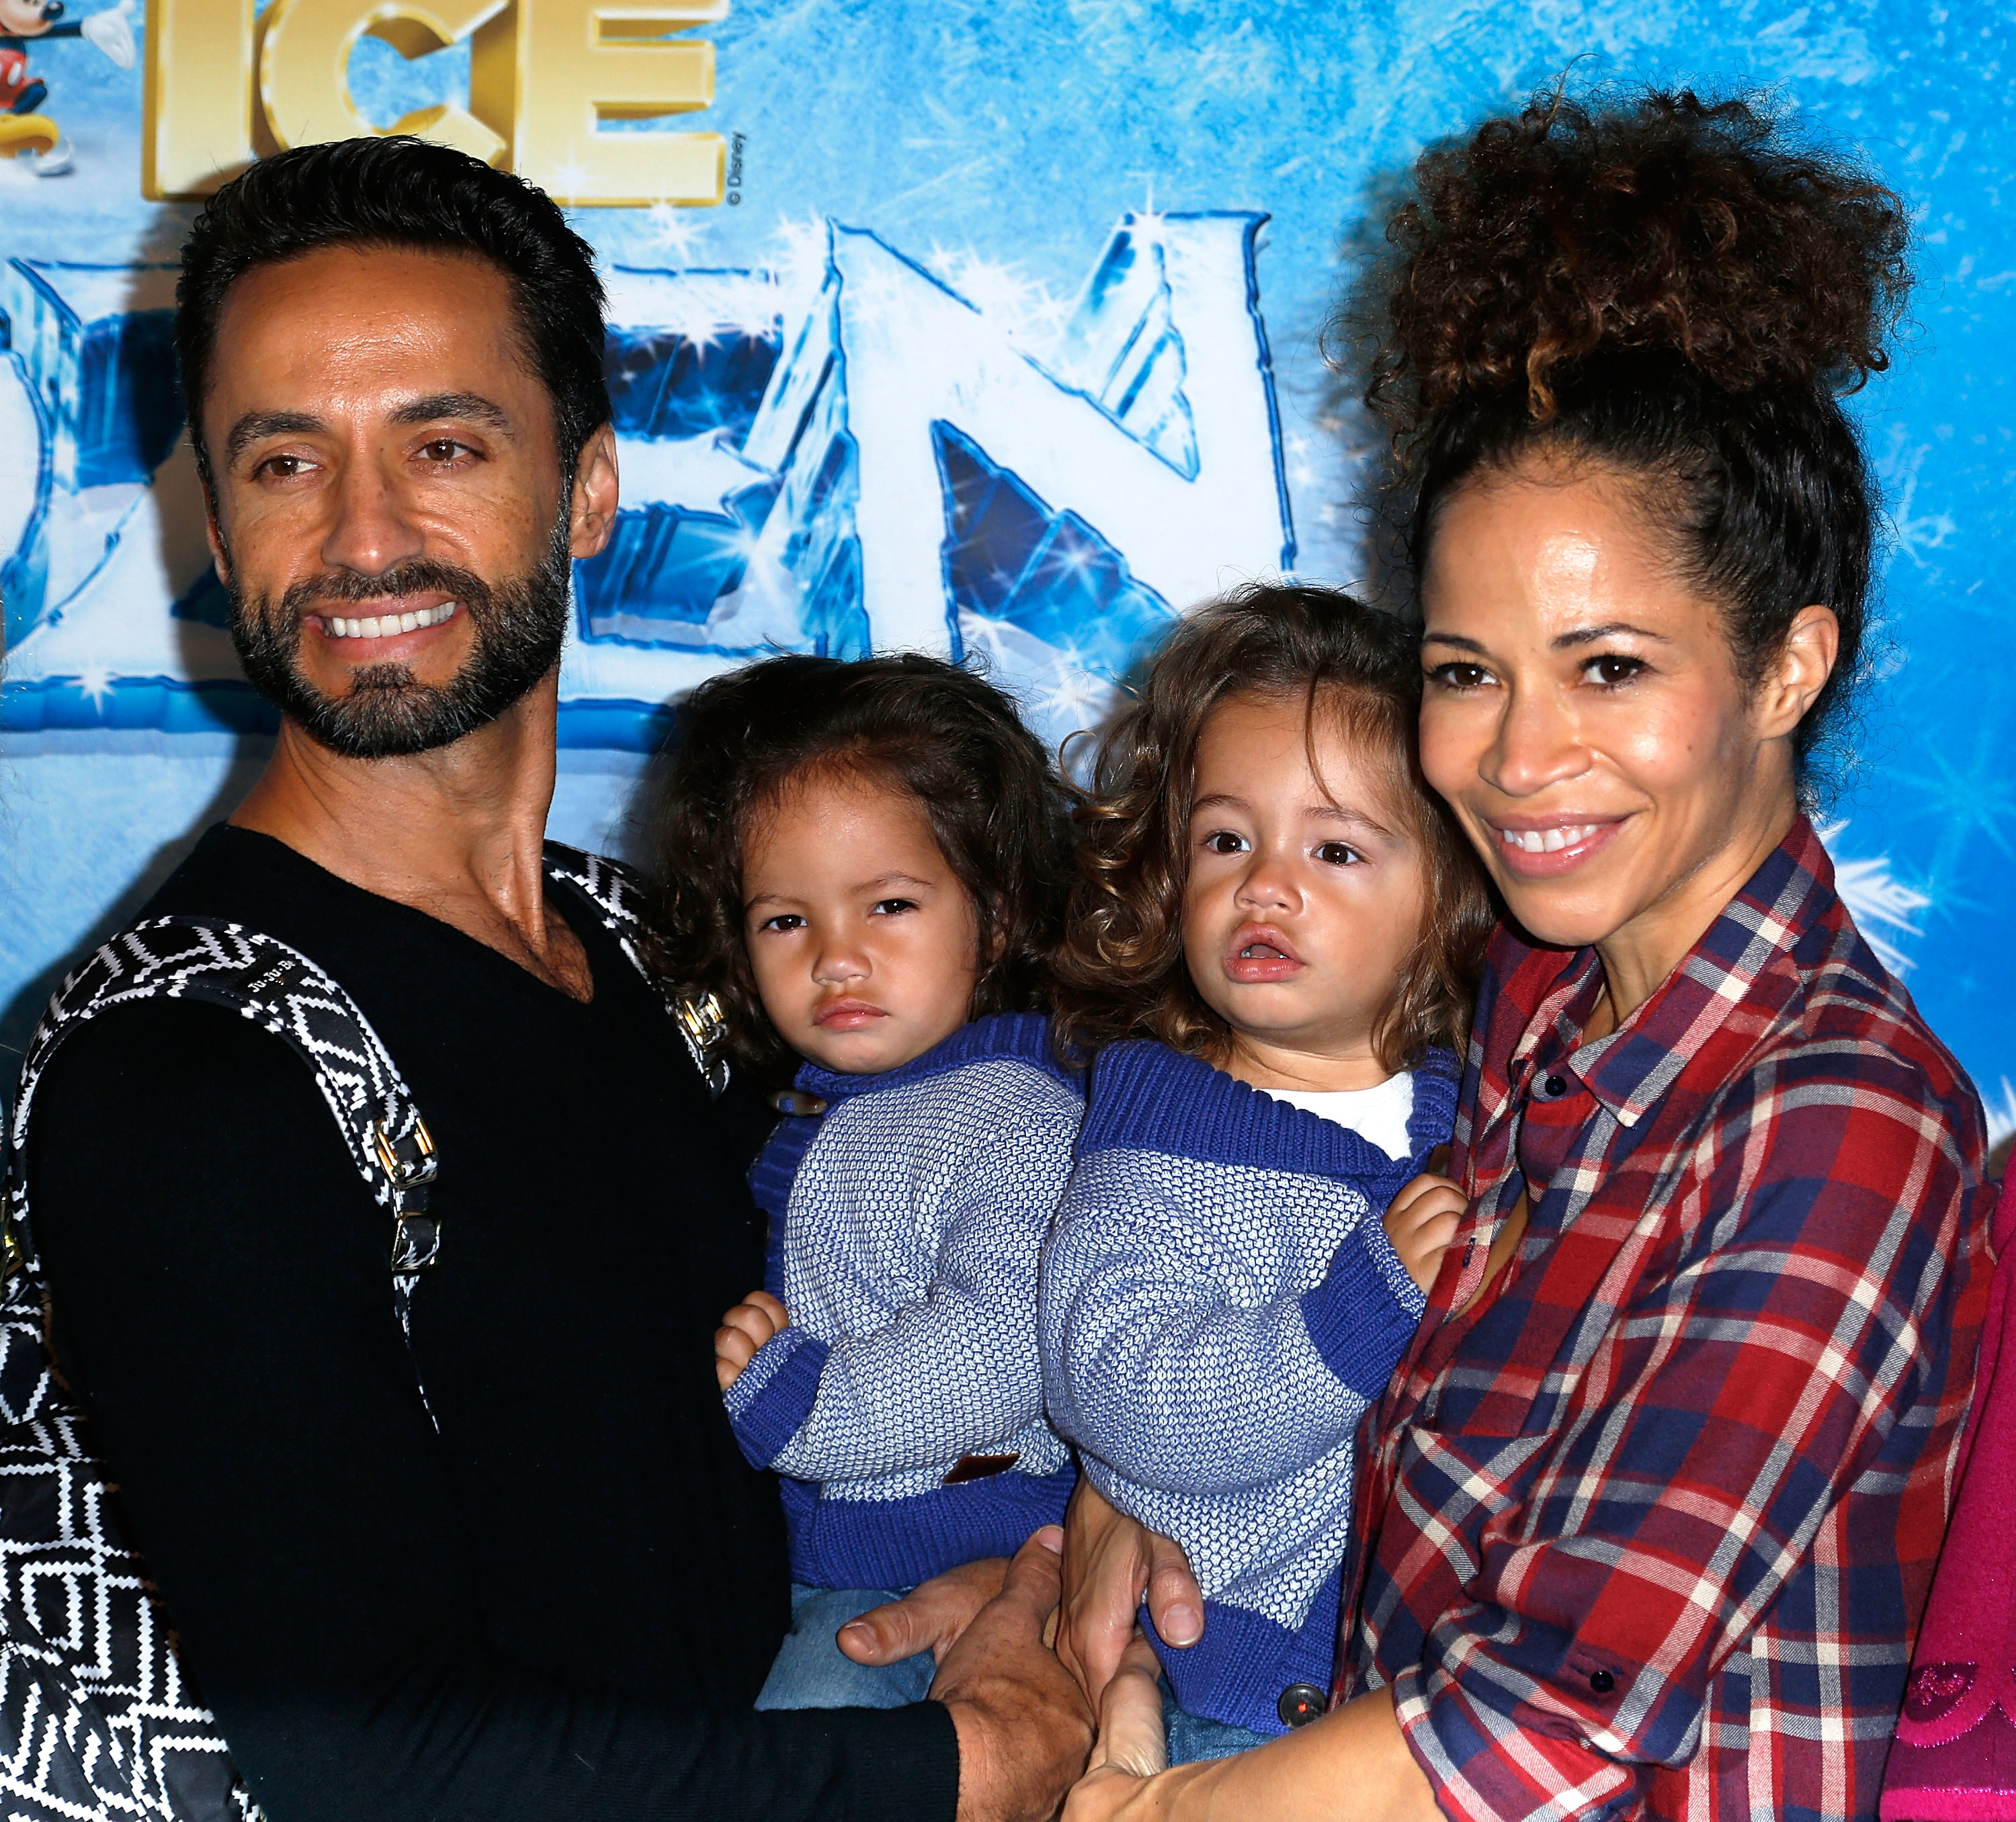 Sherri Saum and Kamar de los Reyes, with sons John and Michael, arrive at the premiere of Disney On Ice's "Frozen" at Staples Center in Los Angeles, California on December 10, 2015. | Source: Getty Images